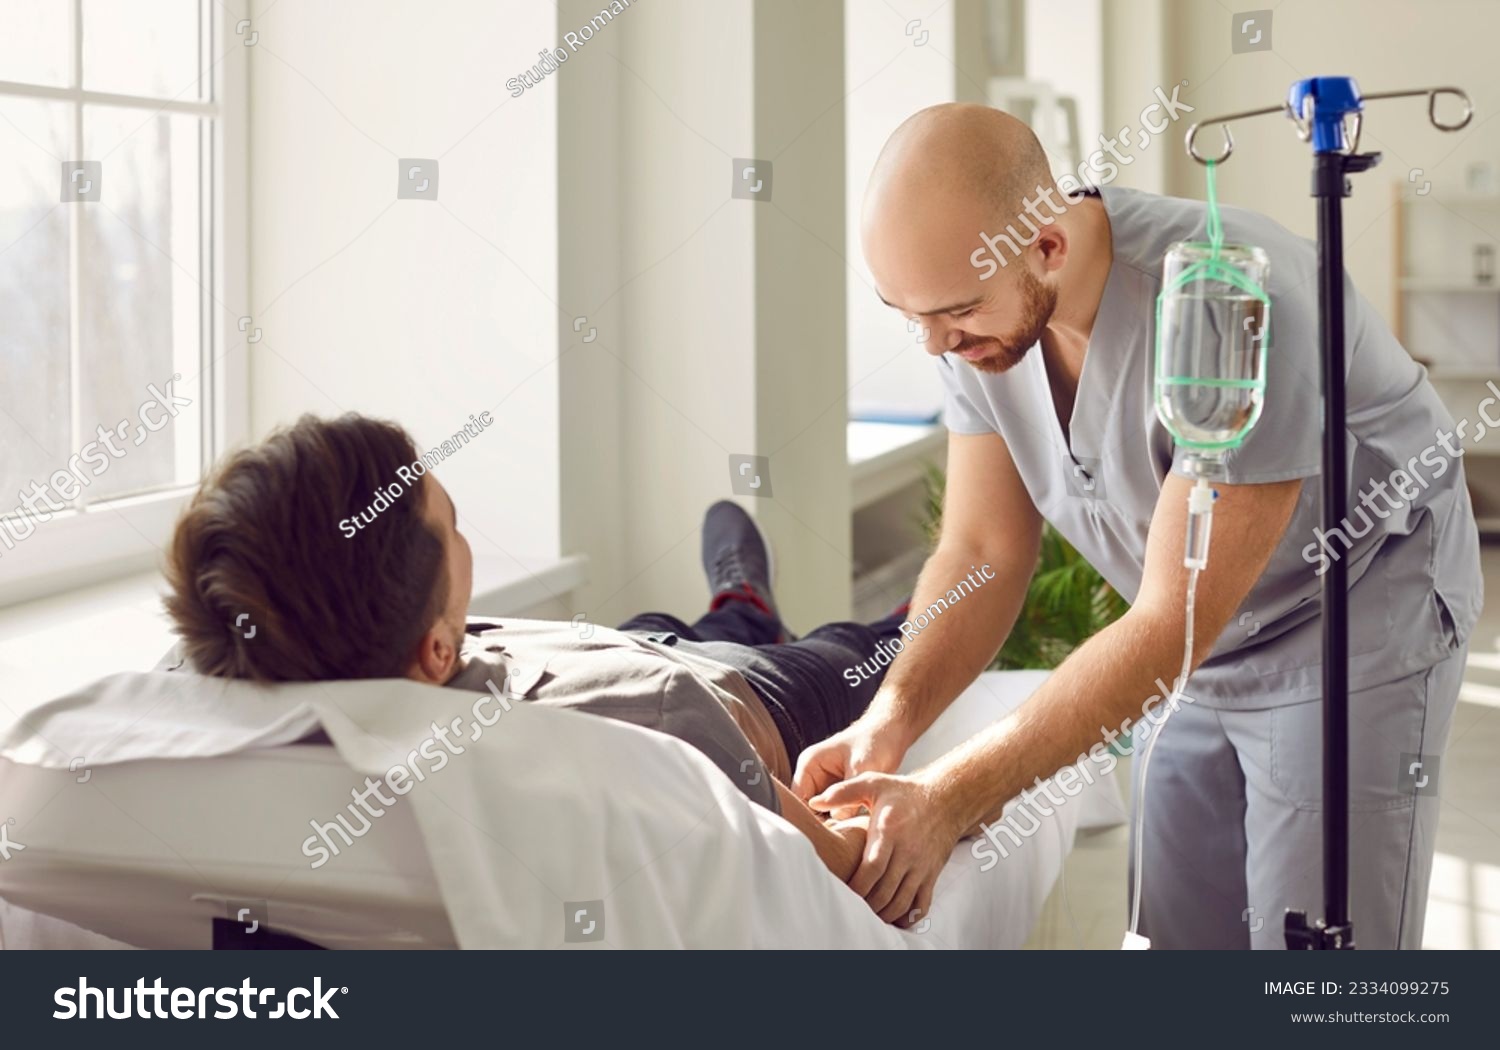 Nursing staff at clinic or hospital gives intravenous vitamin drip or medicine infusion to patient. Nurse personnel inserts venous IV line needle in arm vein of adult man lying on bed in medical ward #2334099275